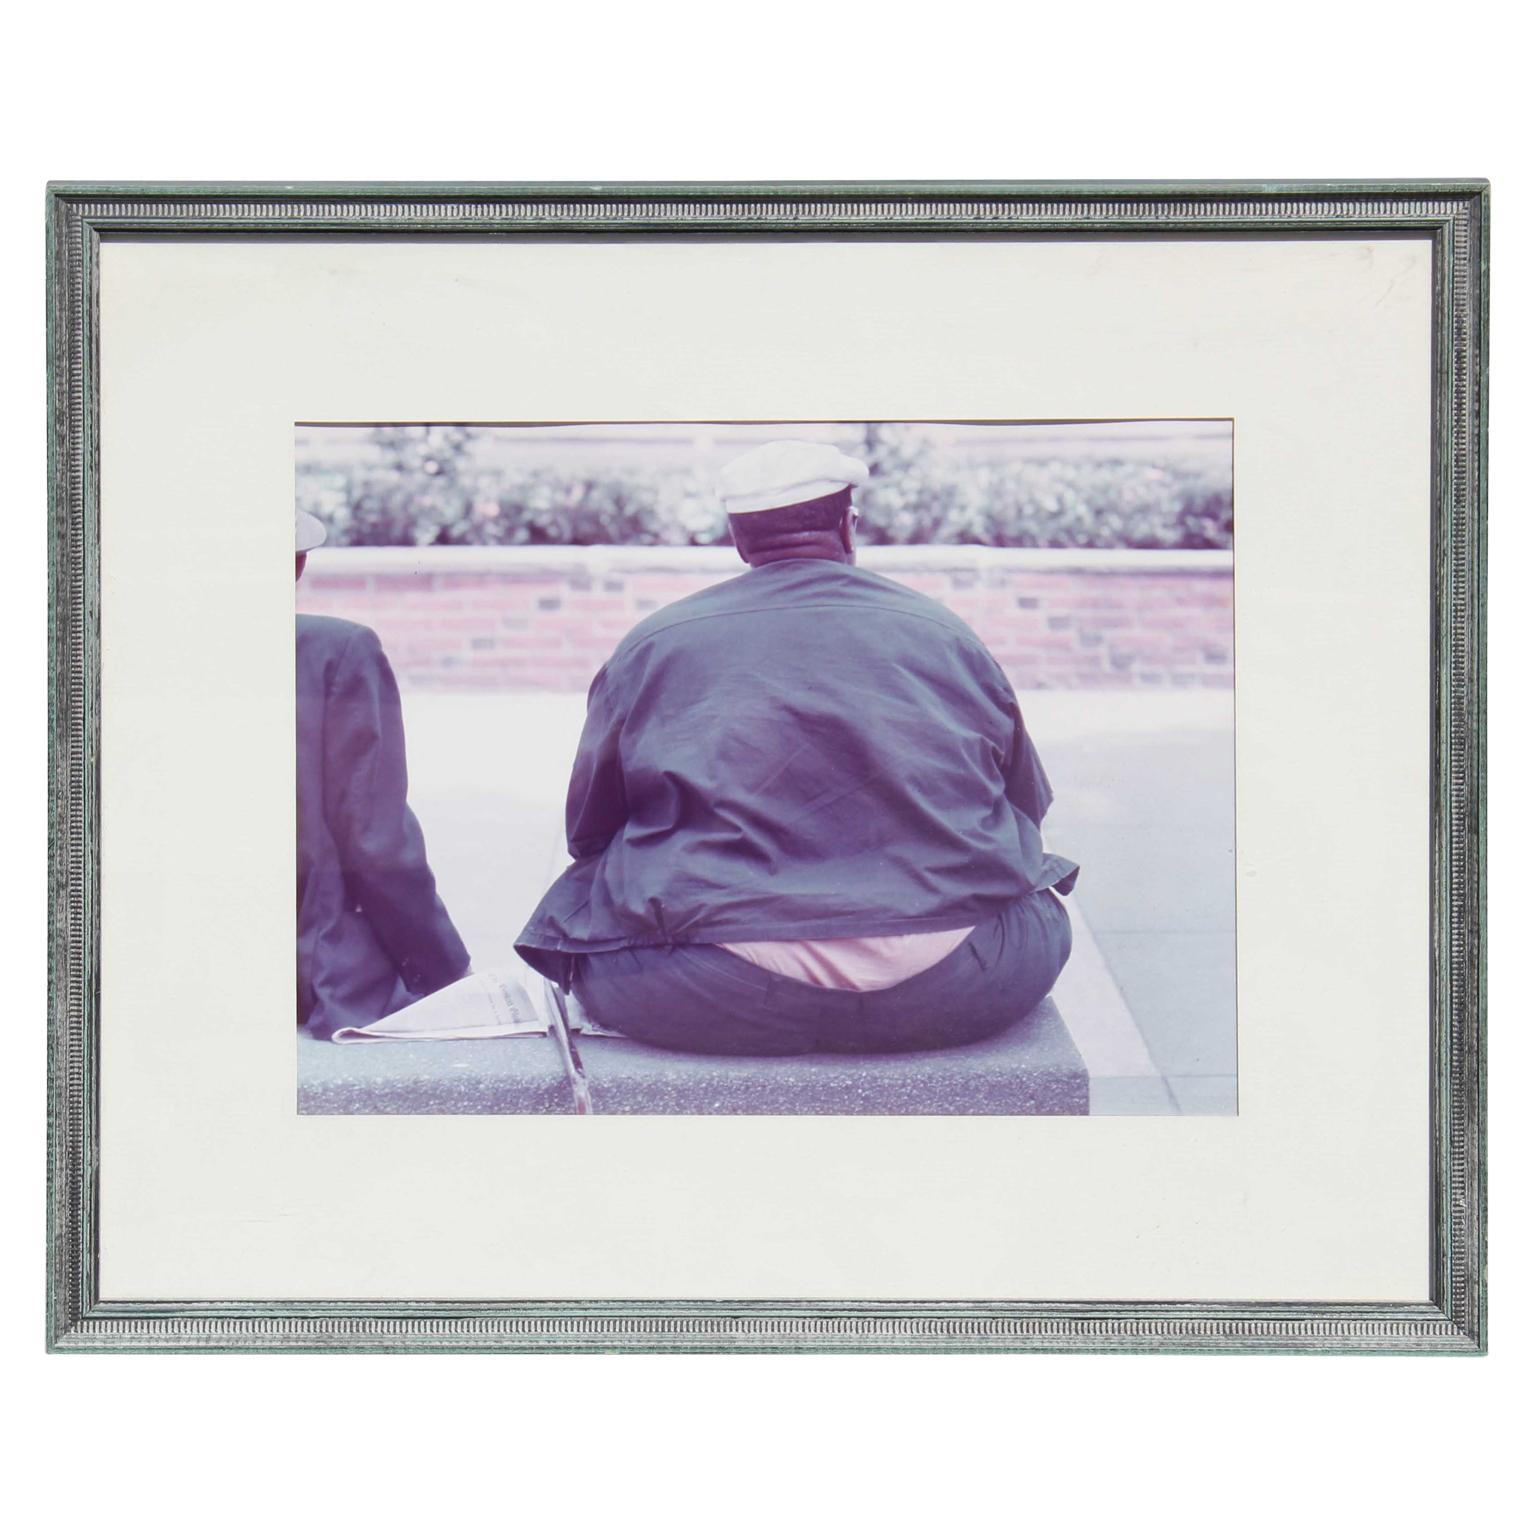 Rodney Susholtz Figurative Photograph - Photograph of Man's Back While Sitting